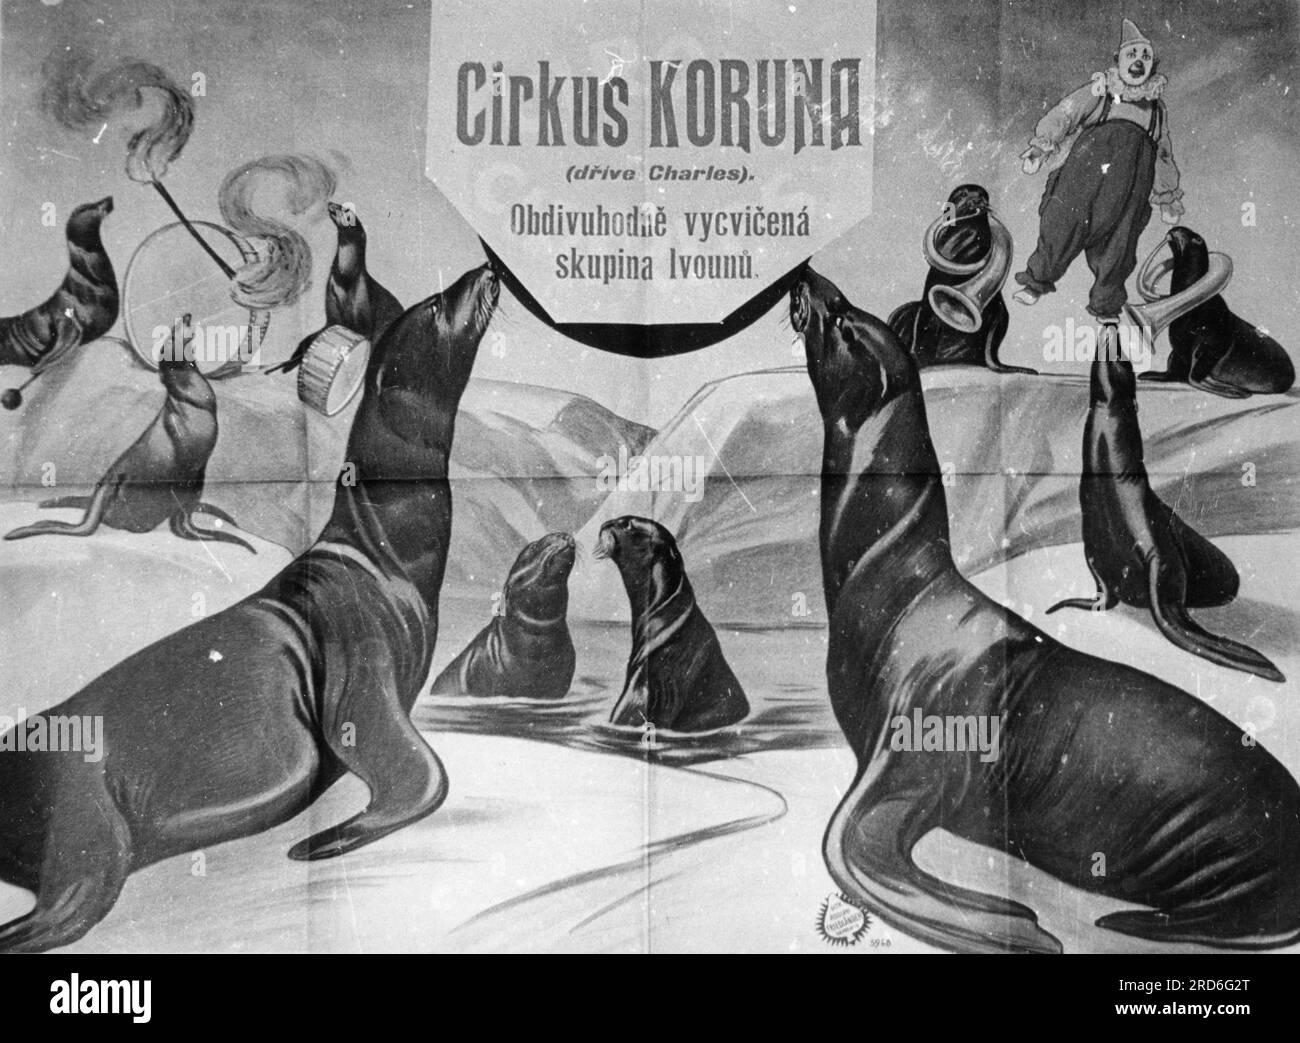 circus, Circus Krone, Slovakian advertising poster, circa 1910, ADDITIONAL-RIGHTS-CLEARANCE-INFO-NOT-AVAILABLE Stock Photo